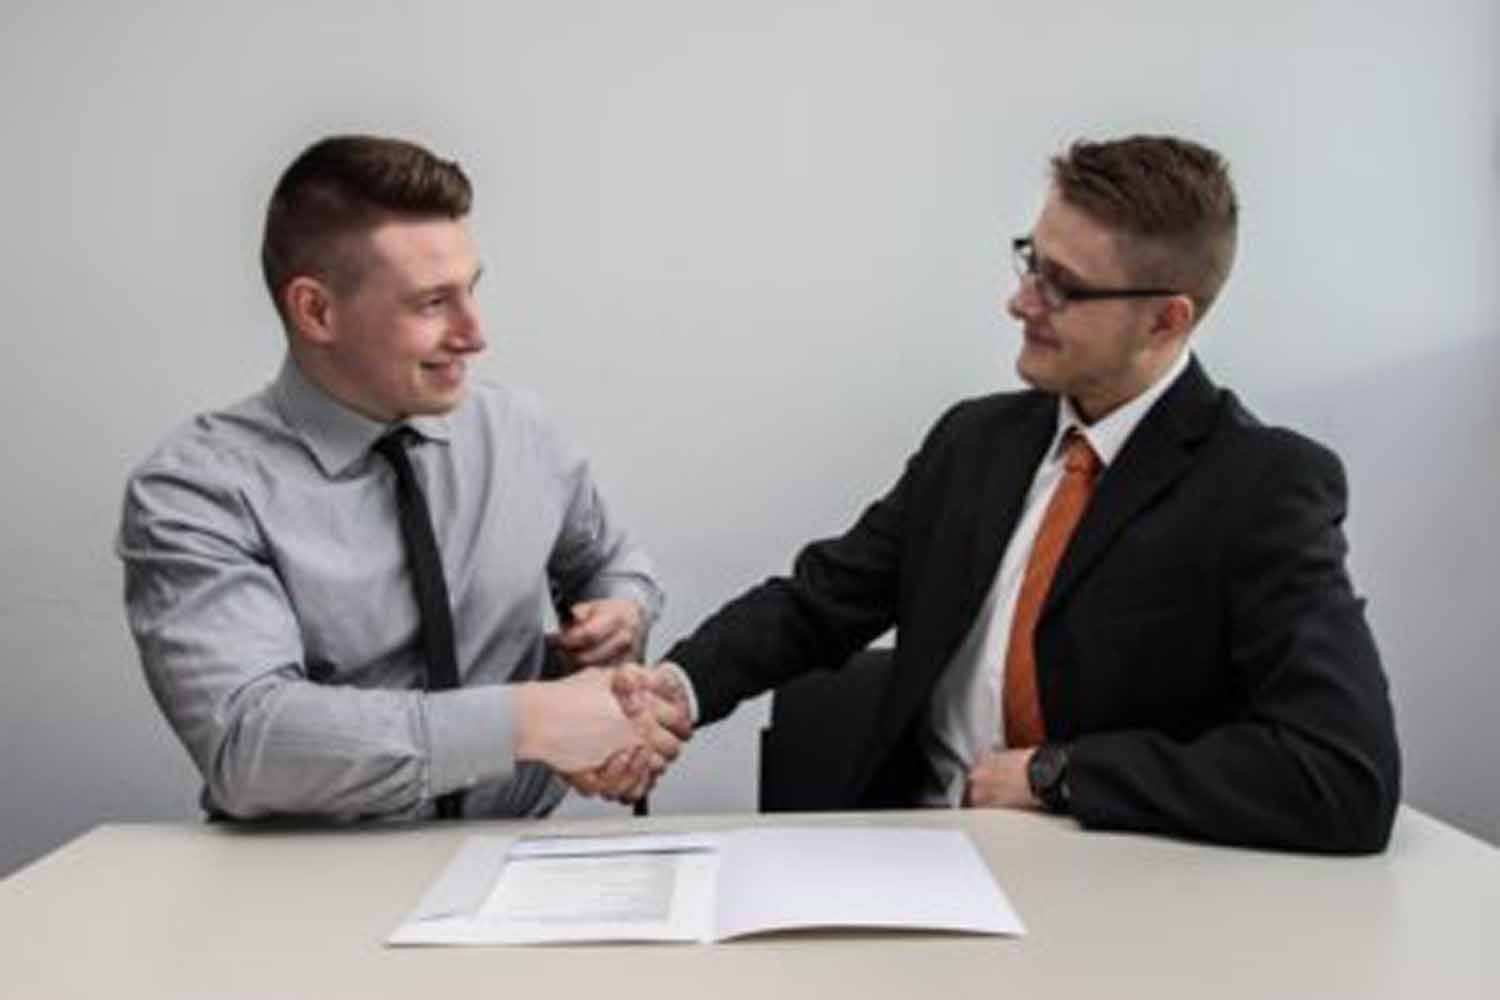 An Employer’s Guide to Drafting and Enforcing Non-Competition Agreements